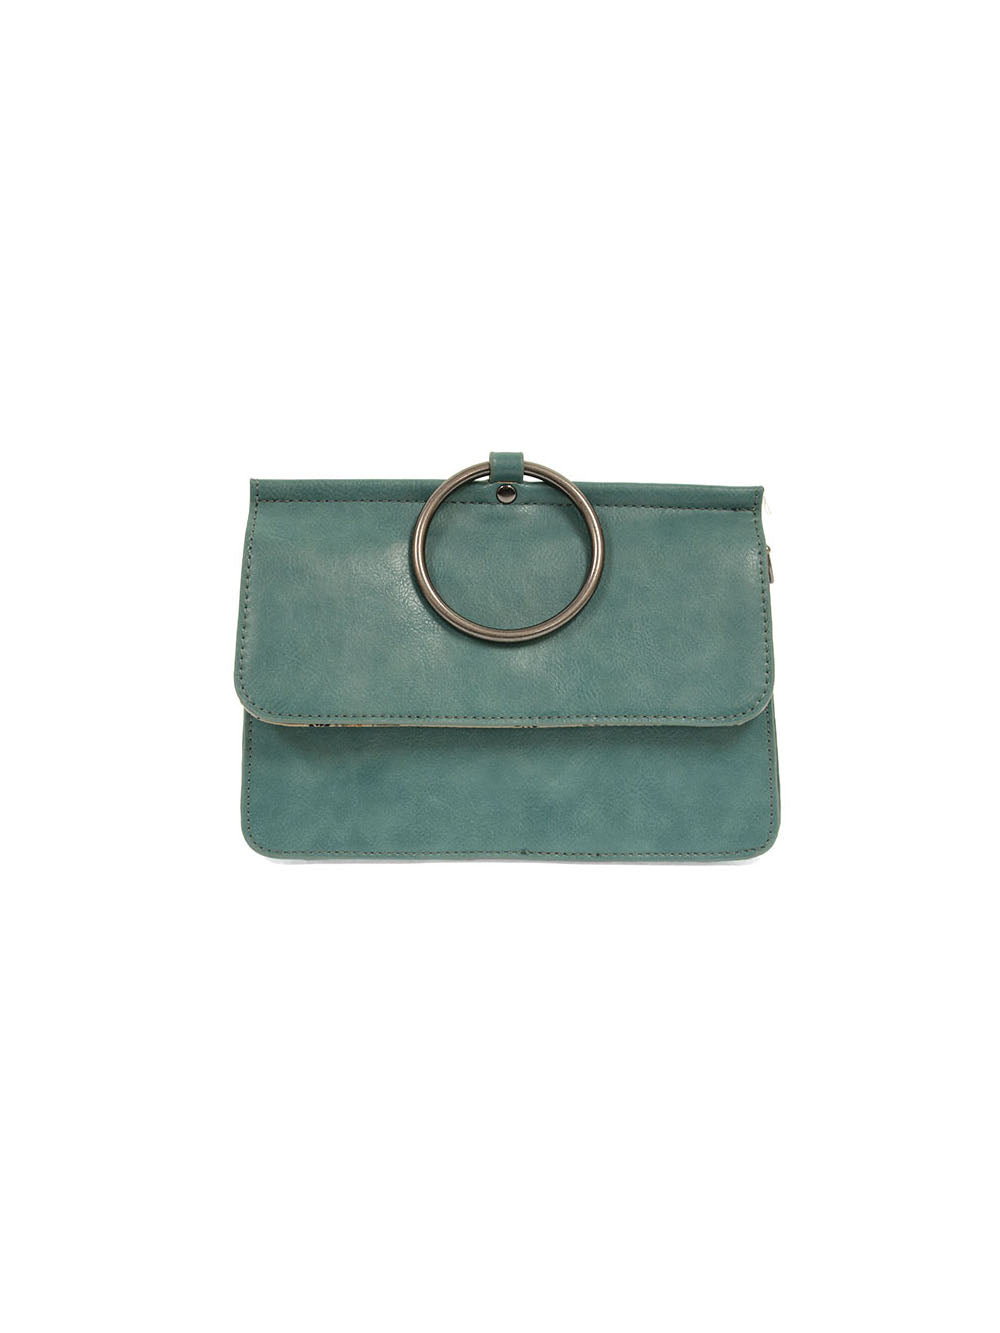 aria crossbody ring bag in teal silver